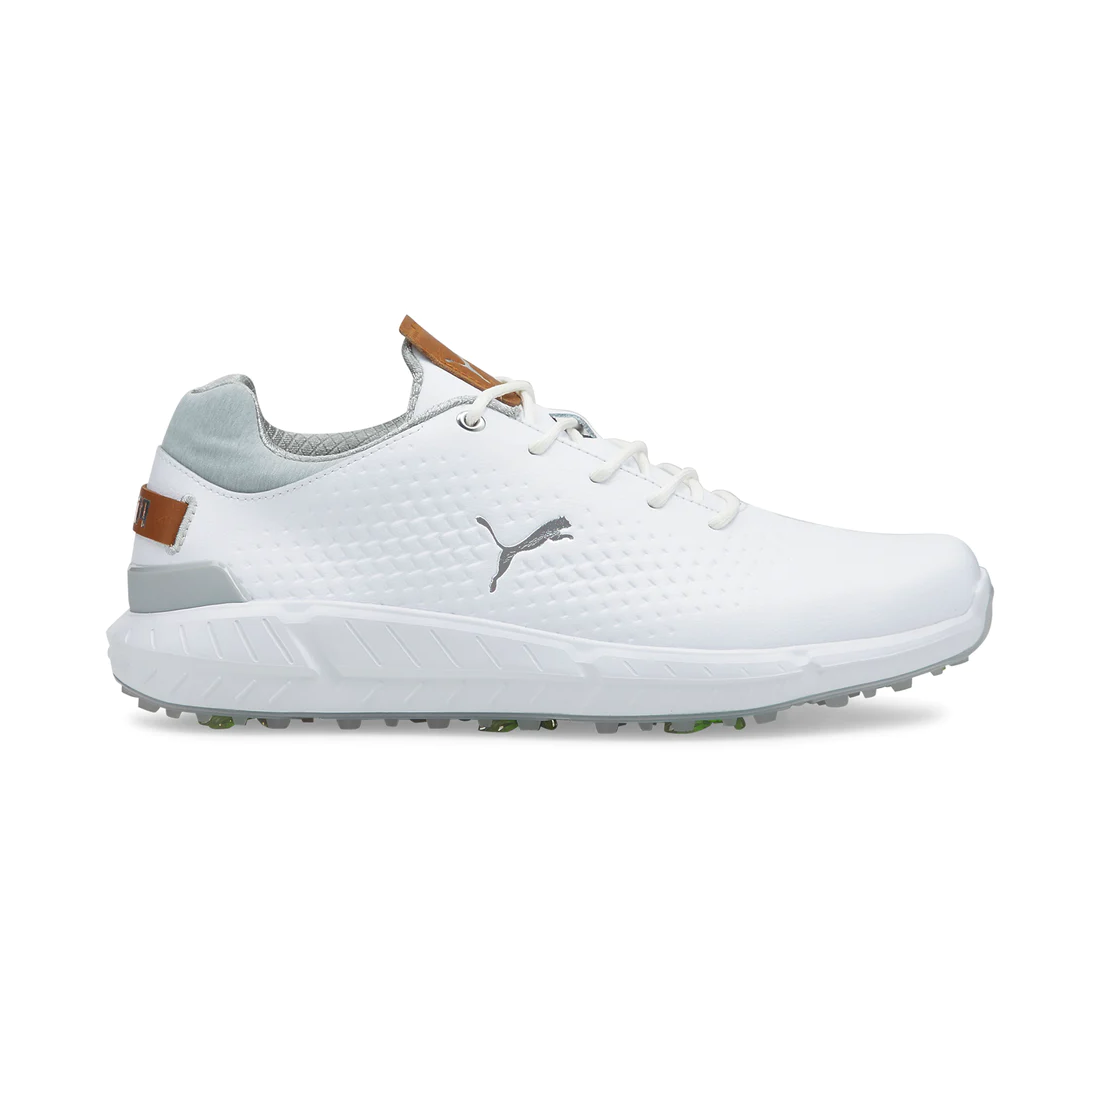 Puma chaussures Ignite Articulate Leather white